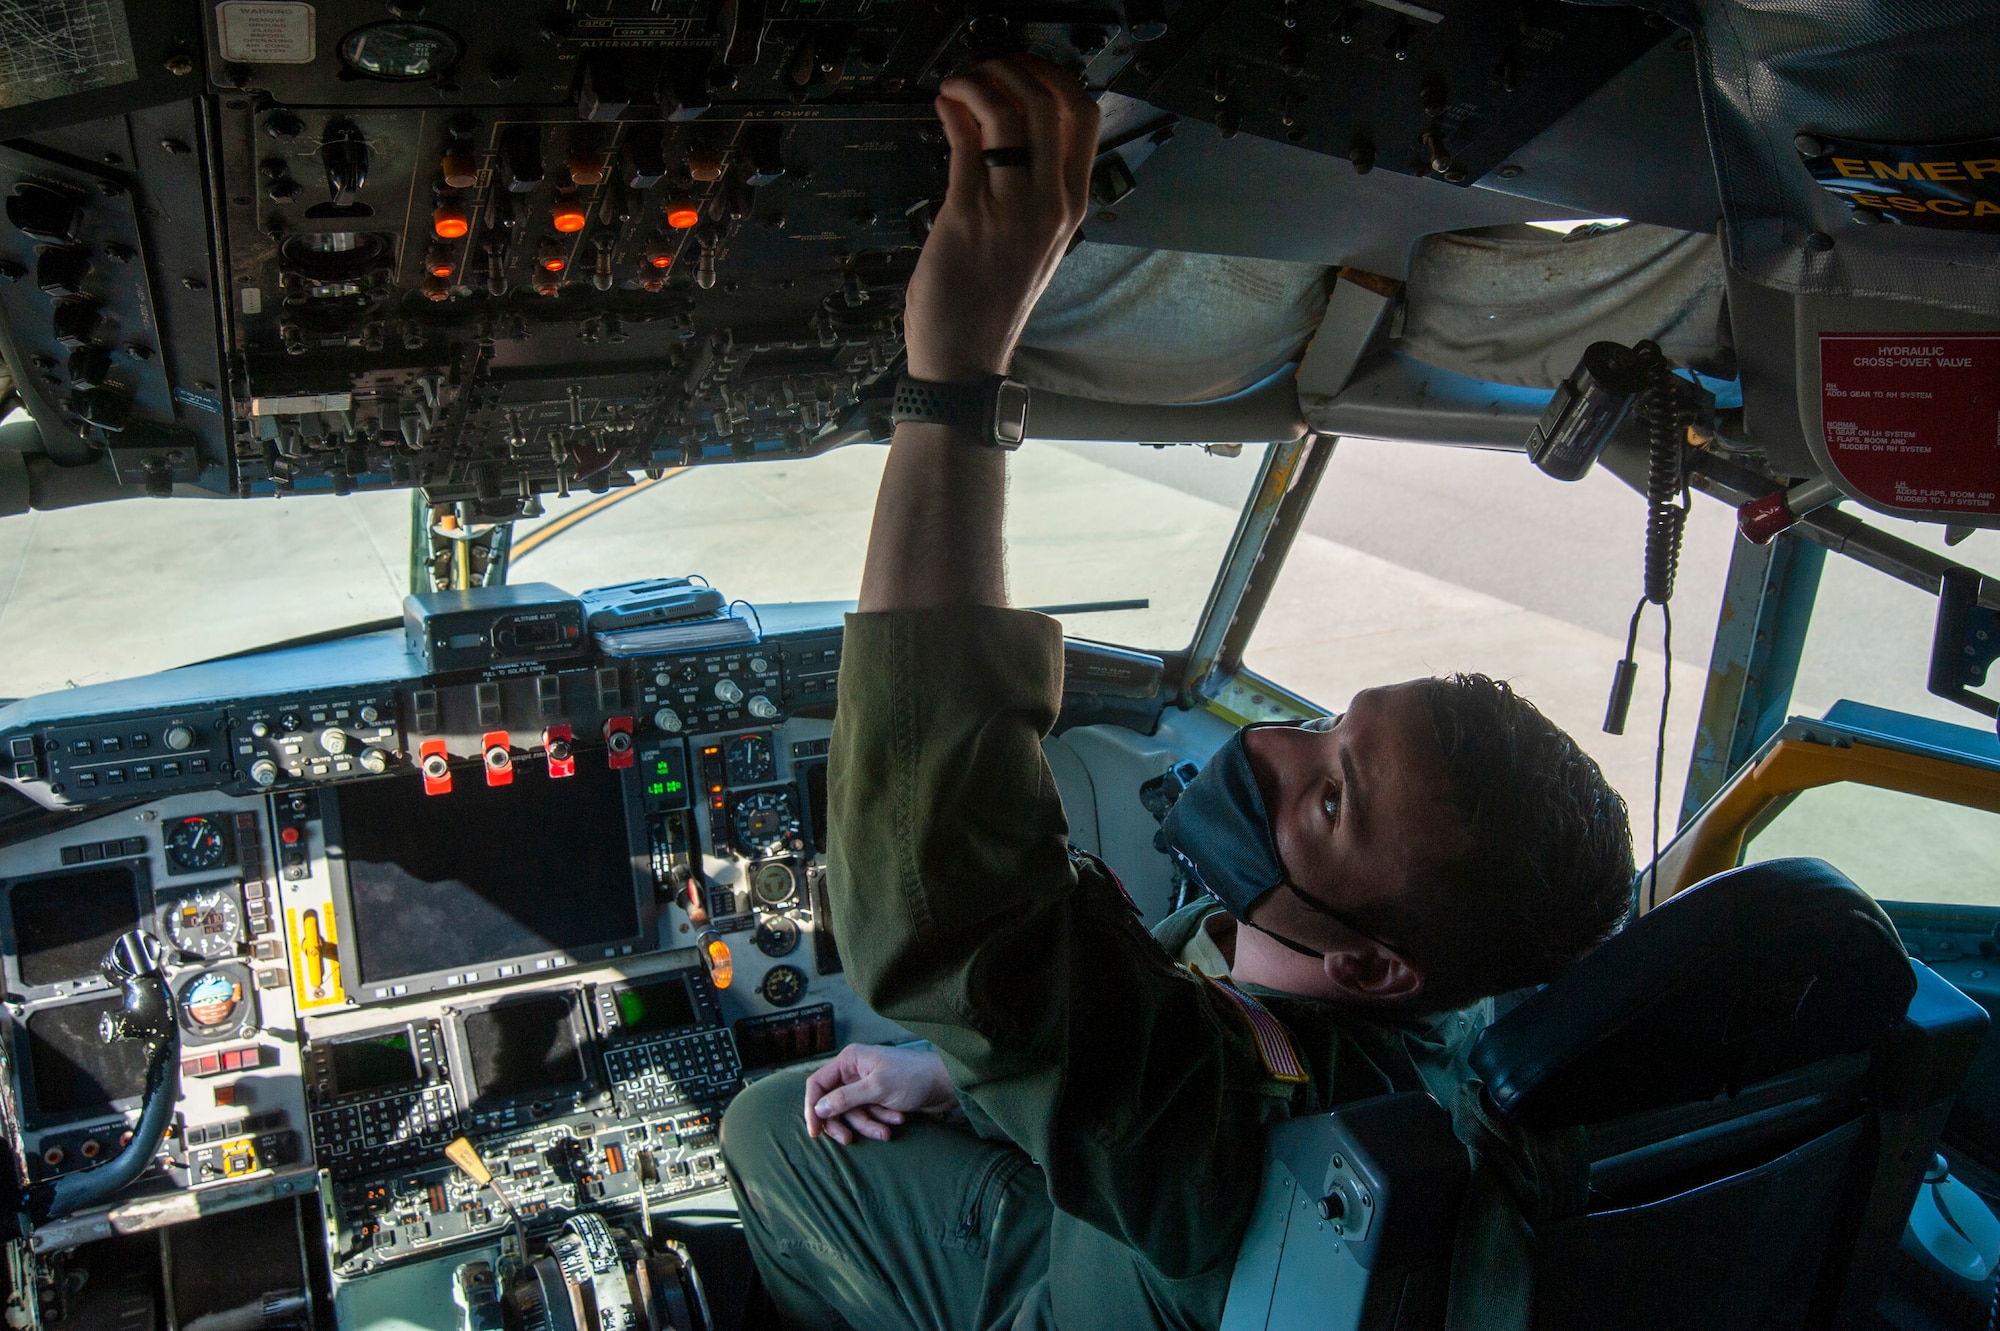 U.S. Air Force 1st Lt. Andres G. Velez, a 50th Air Refueling Squadron (ARS) pilot, performs a preflight check on a KC-135 Stratotanker aircraft at MacDill Air Force Base, Fla., April 9, 2021, prior to a 91st ARS deployment. The checks are designed to ensure all equipment is operational before the aircraft pilots get onboard. (U.S. Air Force photo by Airman 1st Class David D. McLoney)